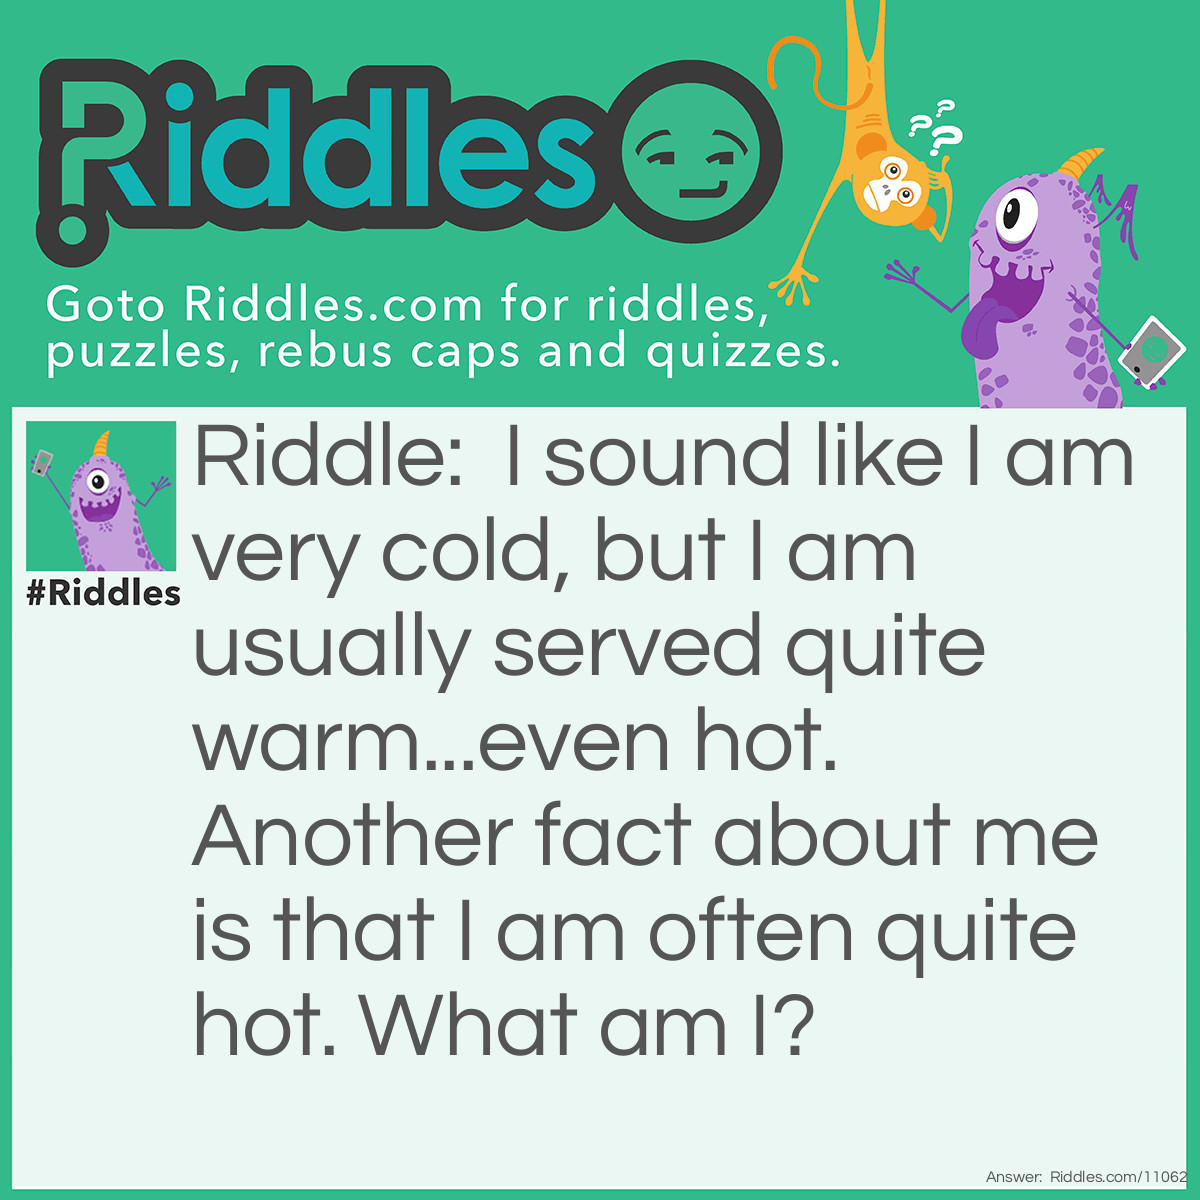 Riddle: I sound like I am very cold, but I am usually served quite warm...even hot. Another fact about me is that I am often quite hot. What am I? Answer: Chili.